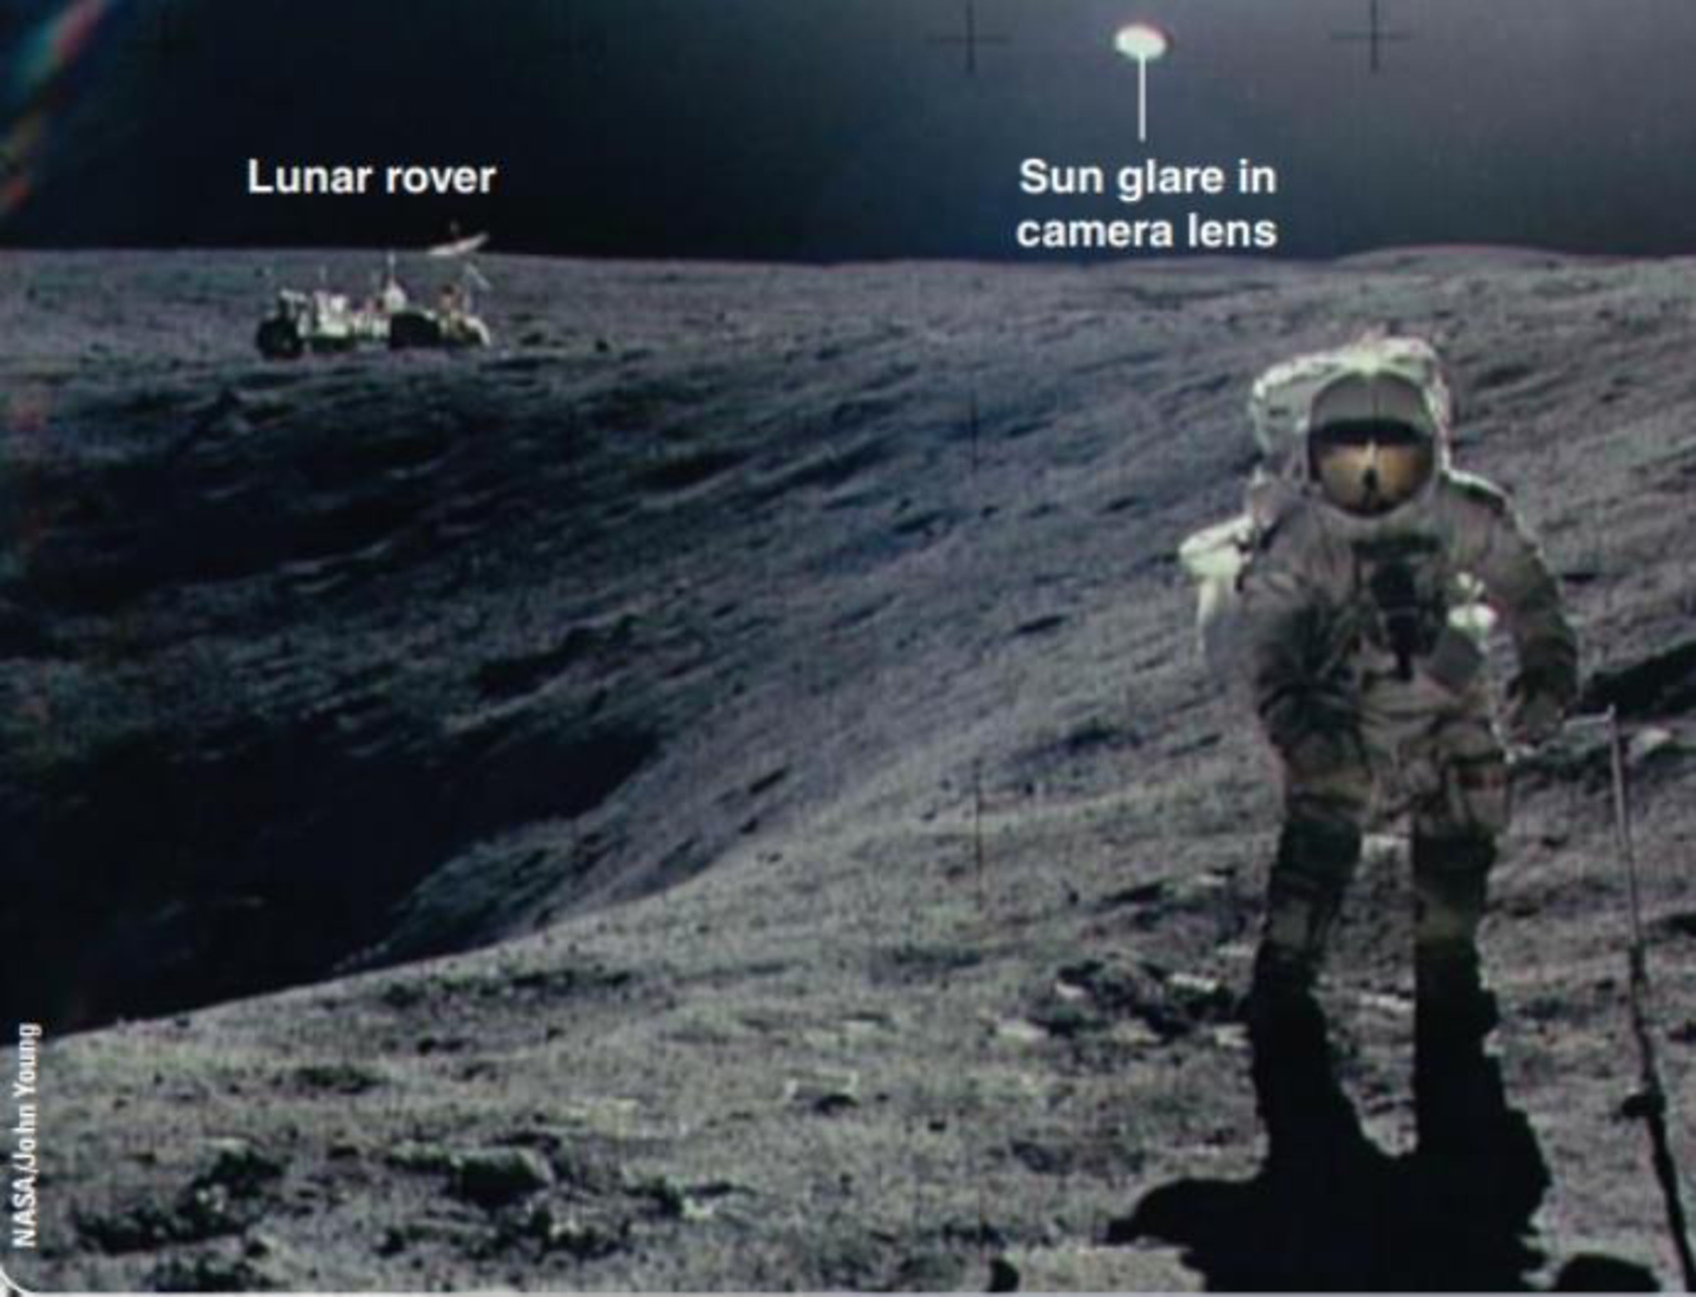 Chapter 20, Problem 1LTL, Look at the image of the astronaut on the Moon at the upper right of the right-hand page of the 